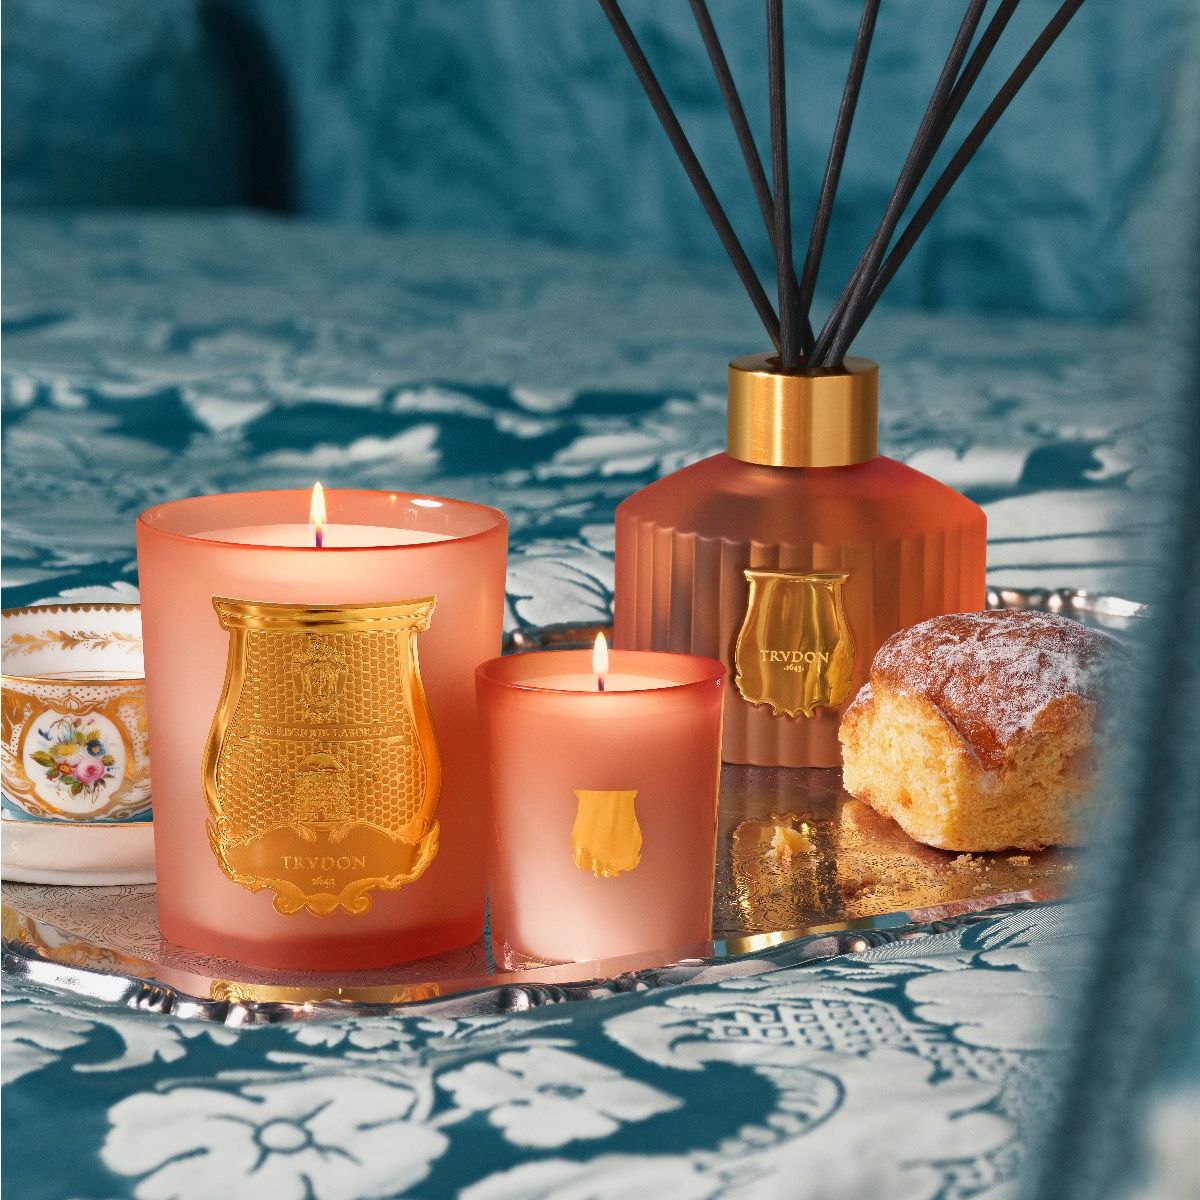 Trudon Scented Candles